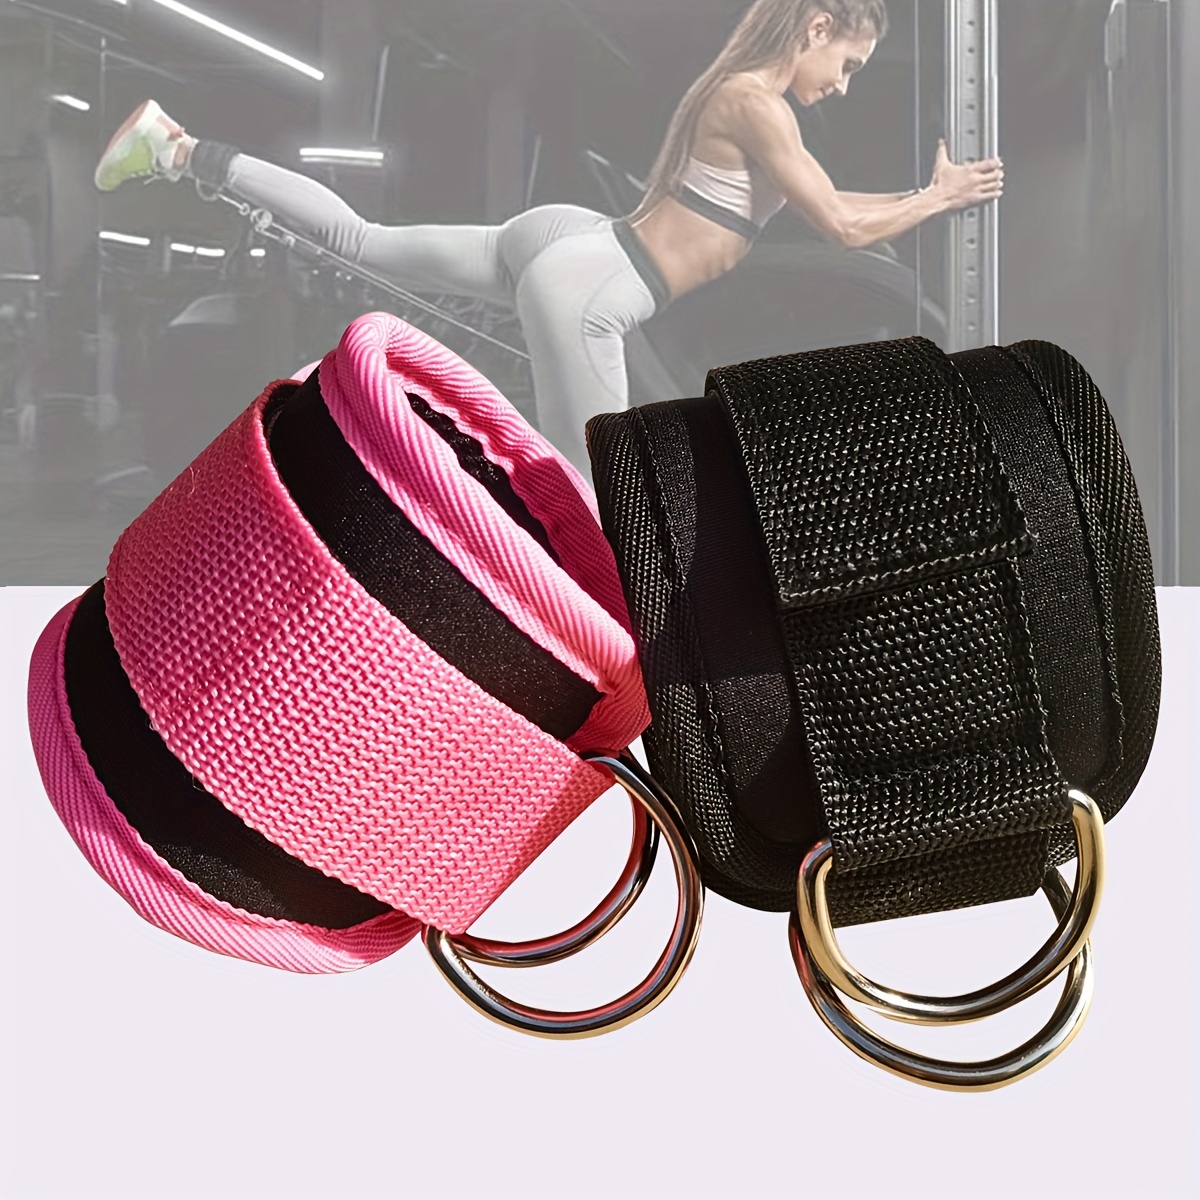 Fitness Ankle Straps Adjustable D-Ring Foot Support Cuffs Gym Leg Strength  Workouts Pulley With Buckle Sports Feet Guard